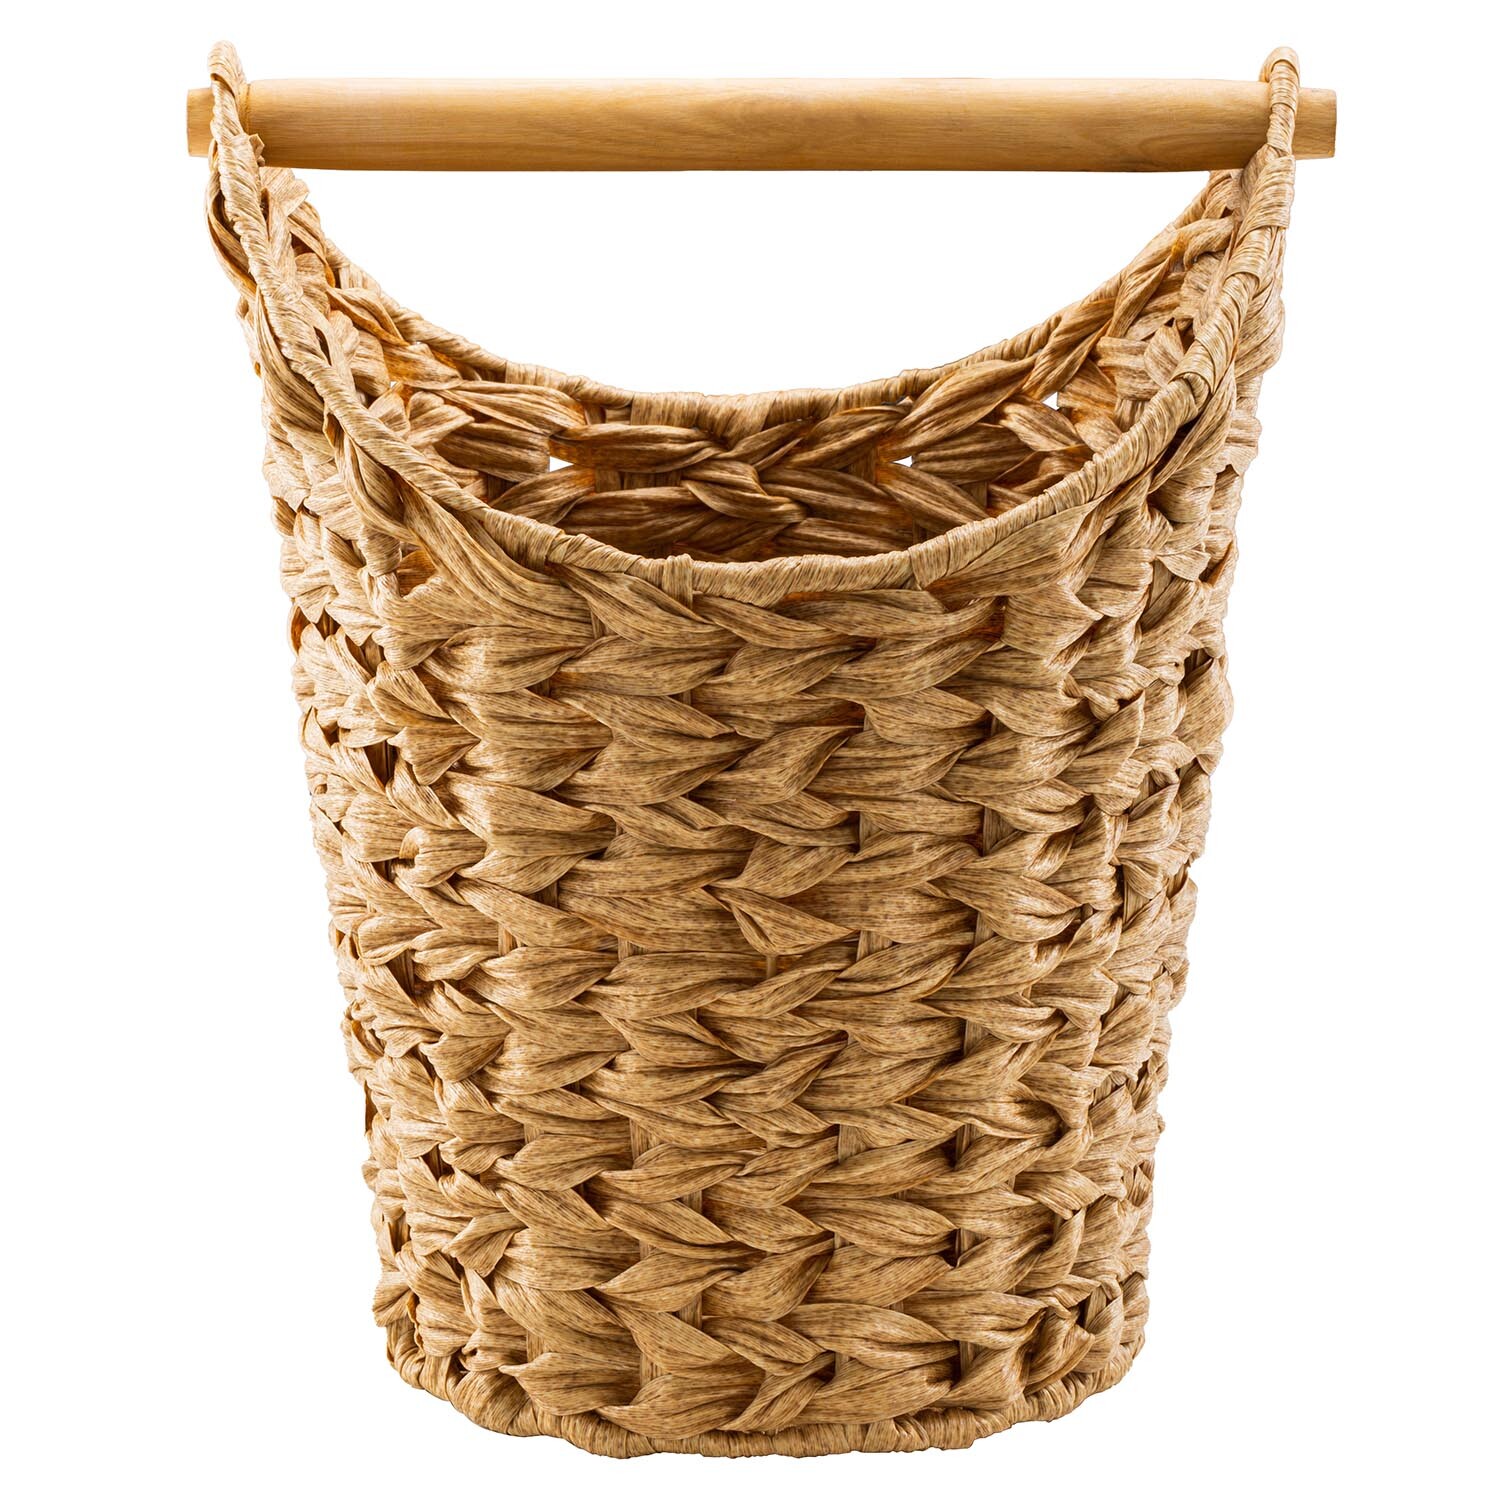 Wicker Toilet Roll Basket - Natural Image 1